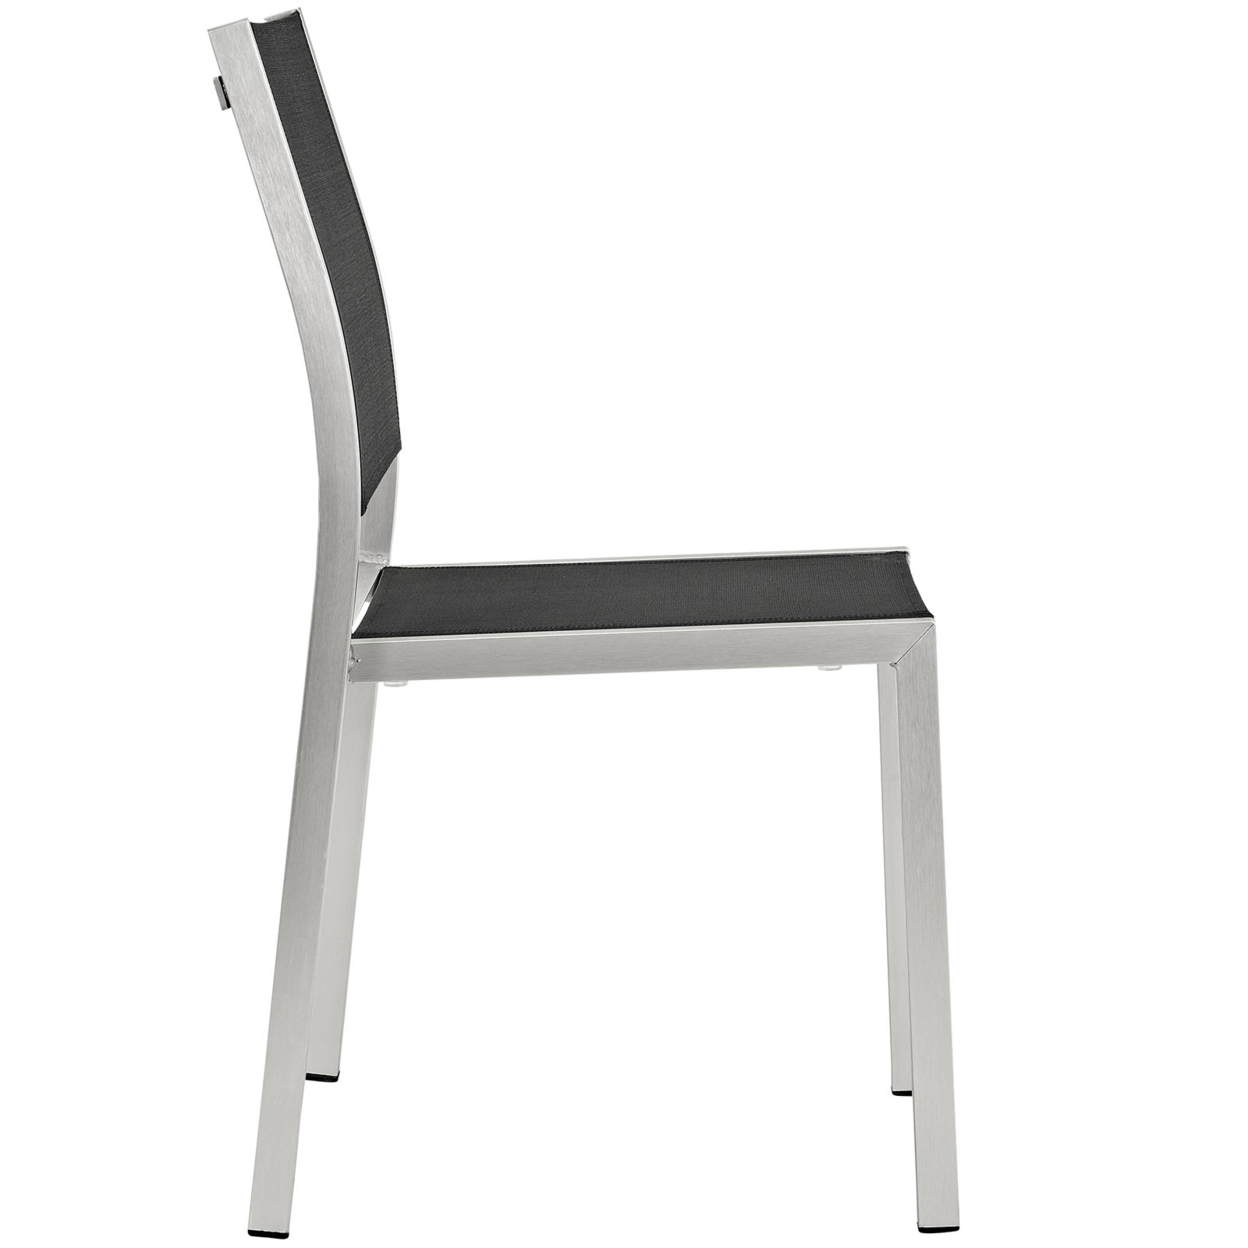 Silver Black Shore Outdoor Patio Aluminum Side Chair - image 2 of 4